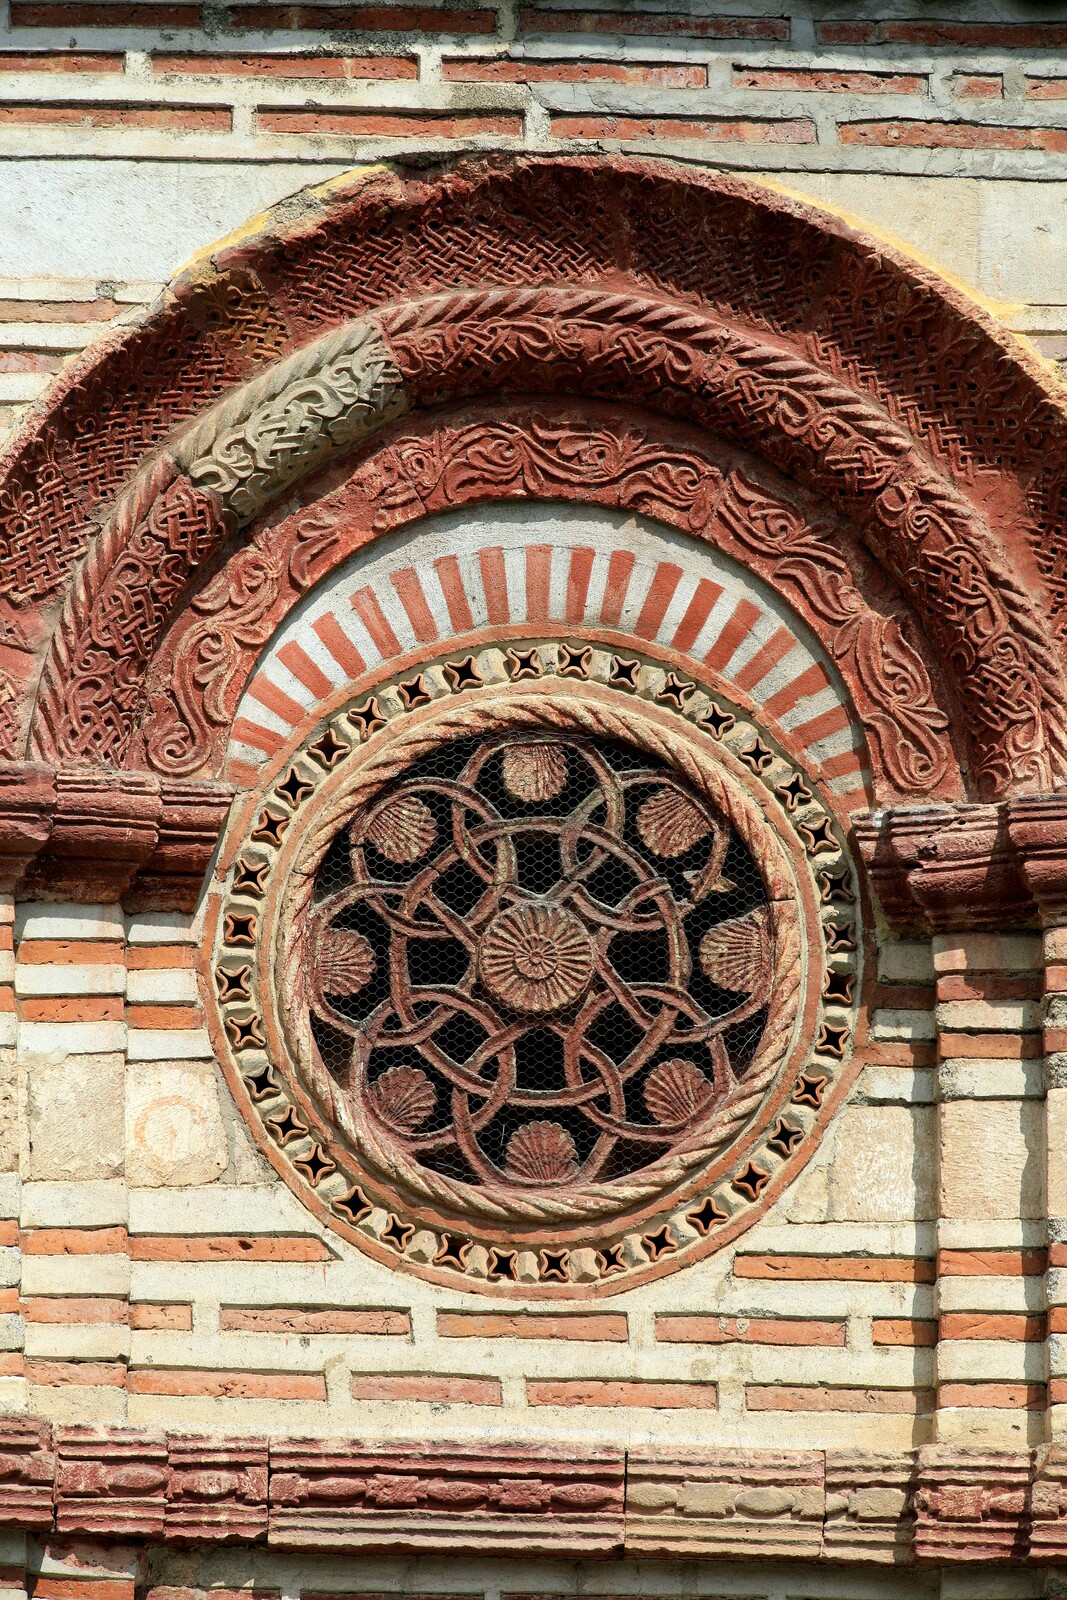 Archivolt and Rosette on the South Wall of the Nave